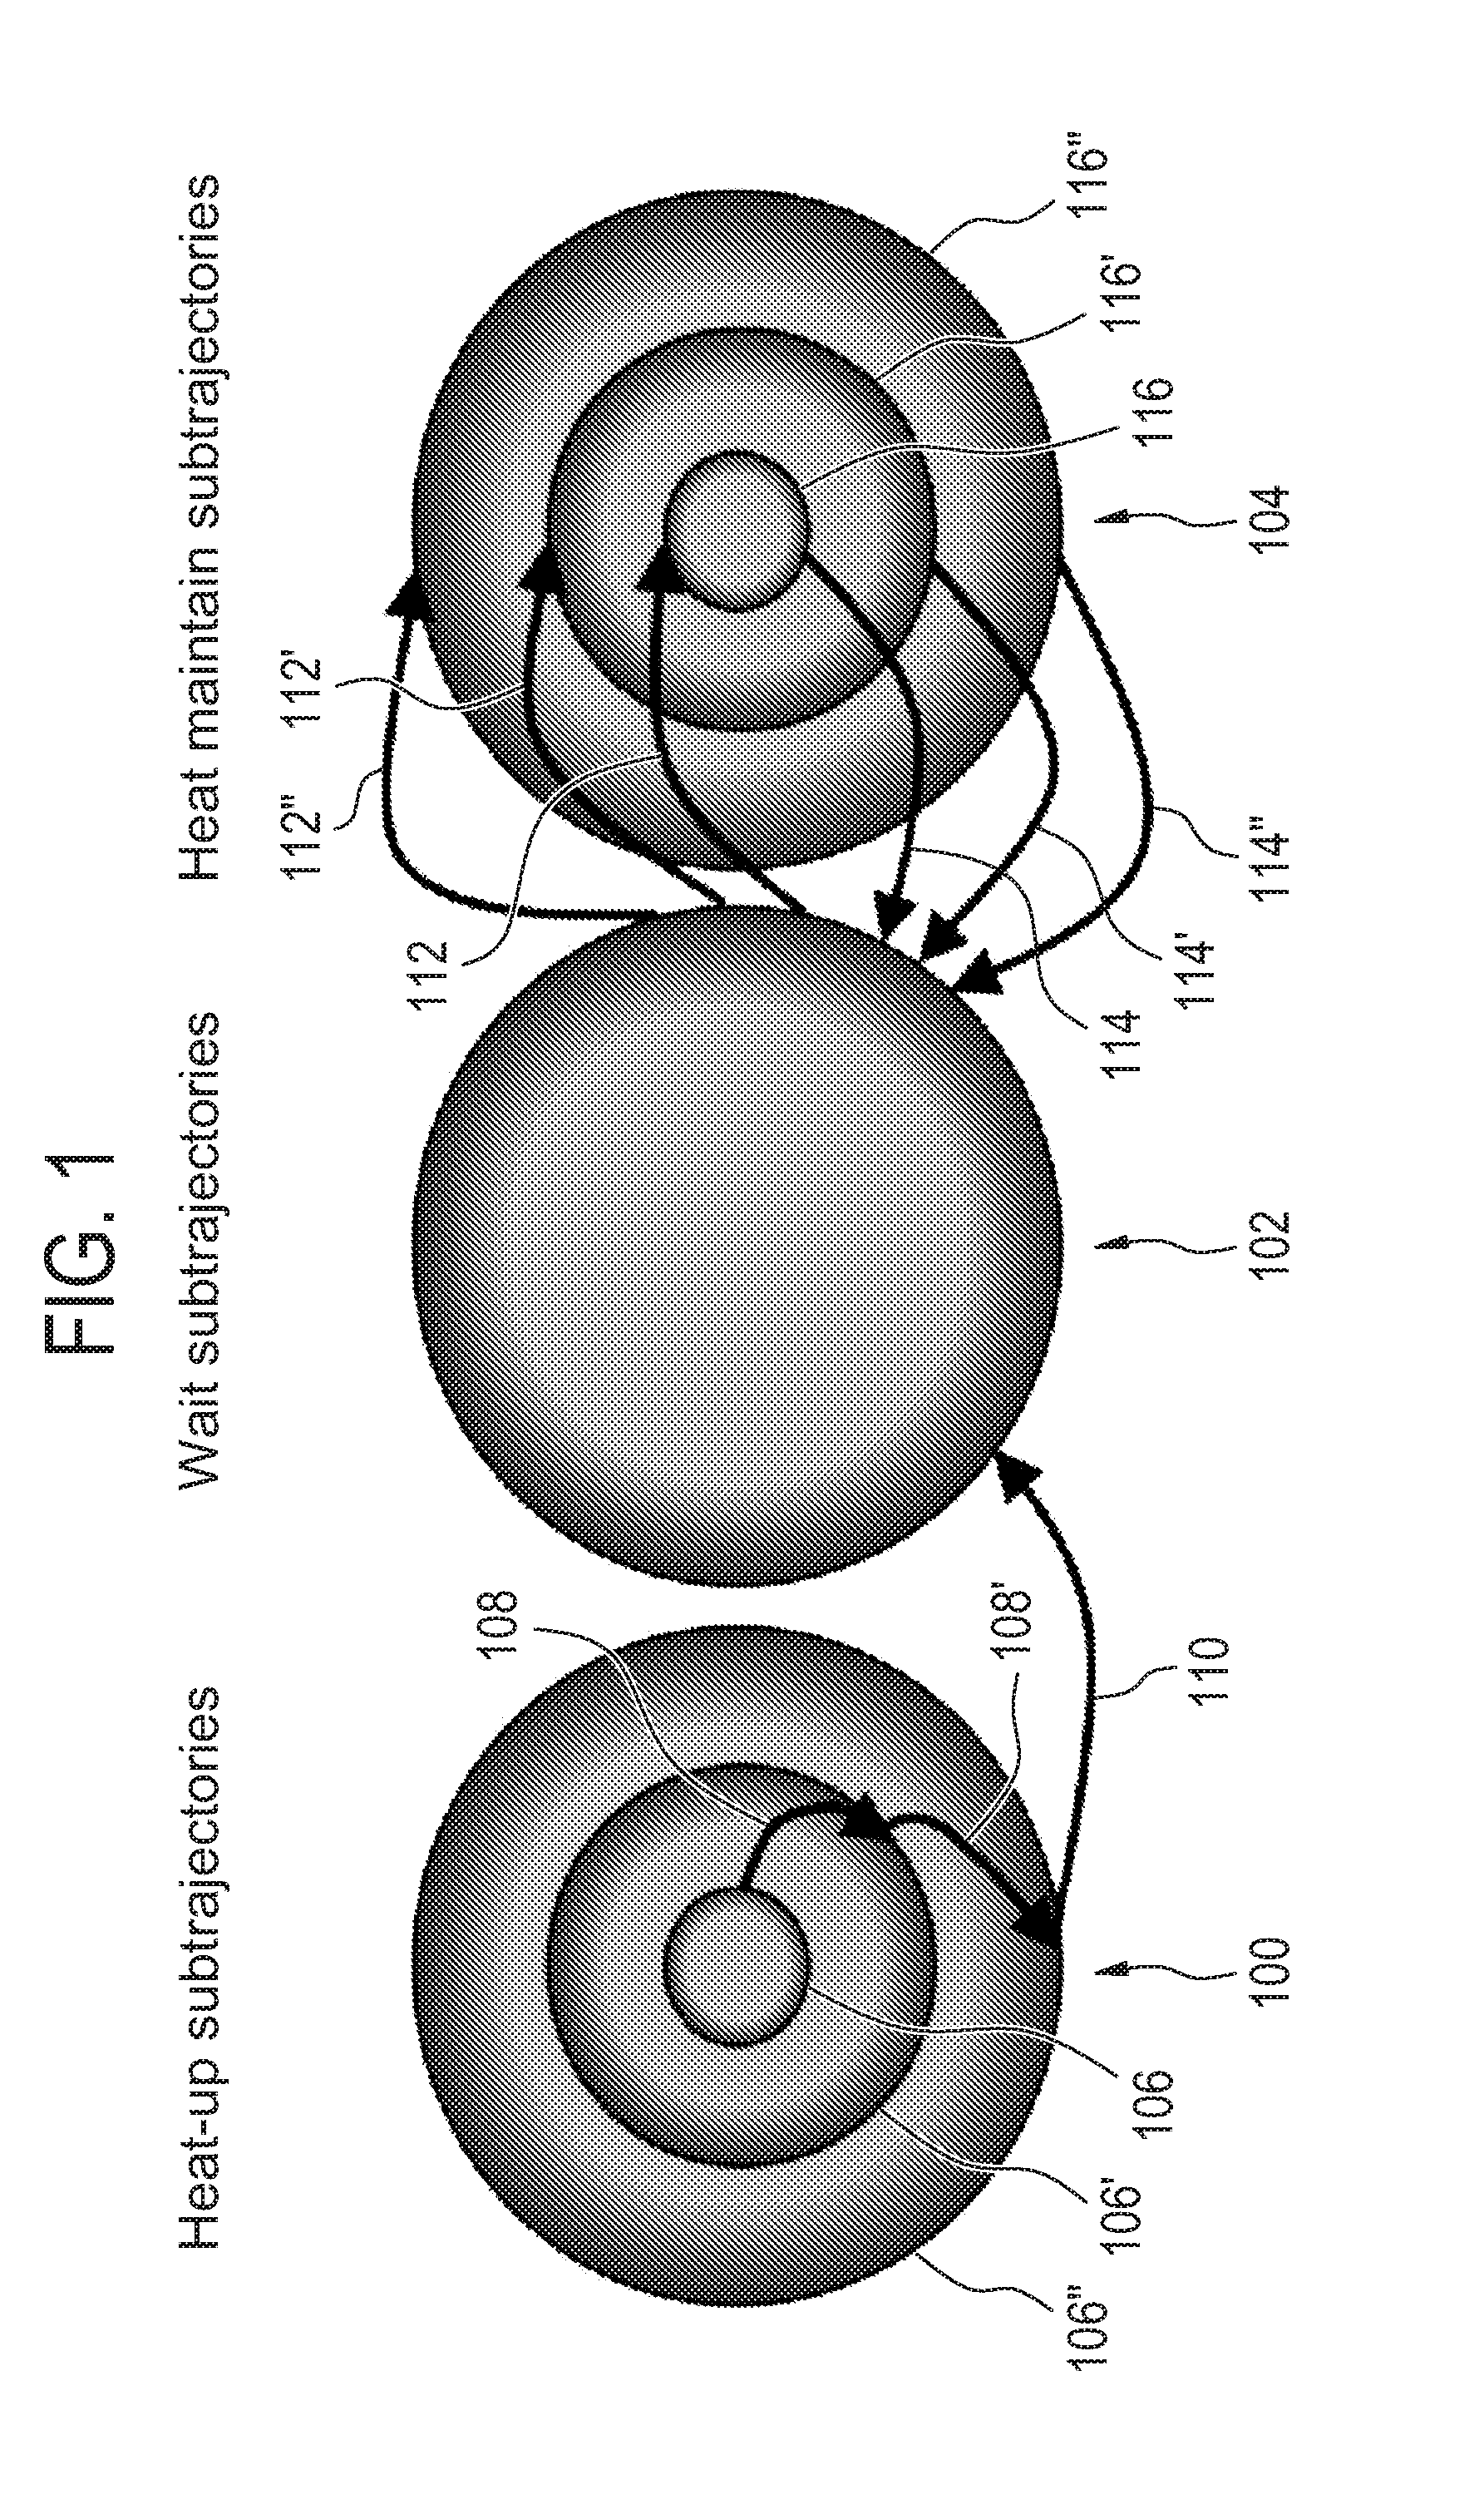 Therapeutic apparatus for heating a subject